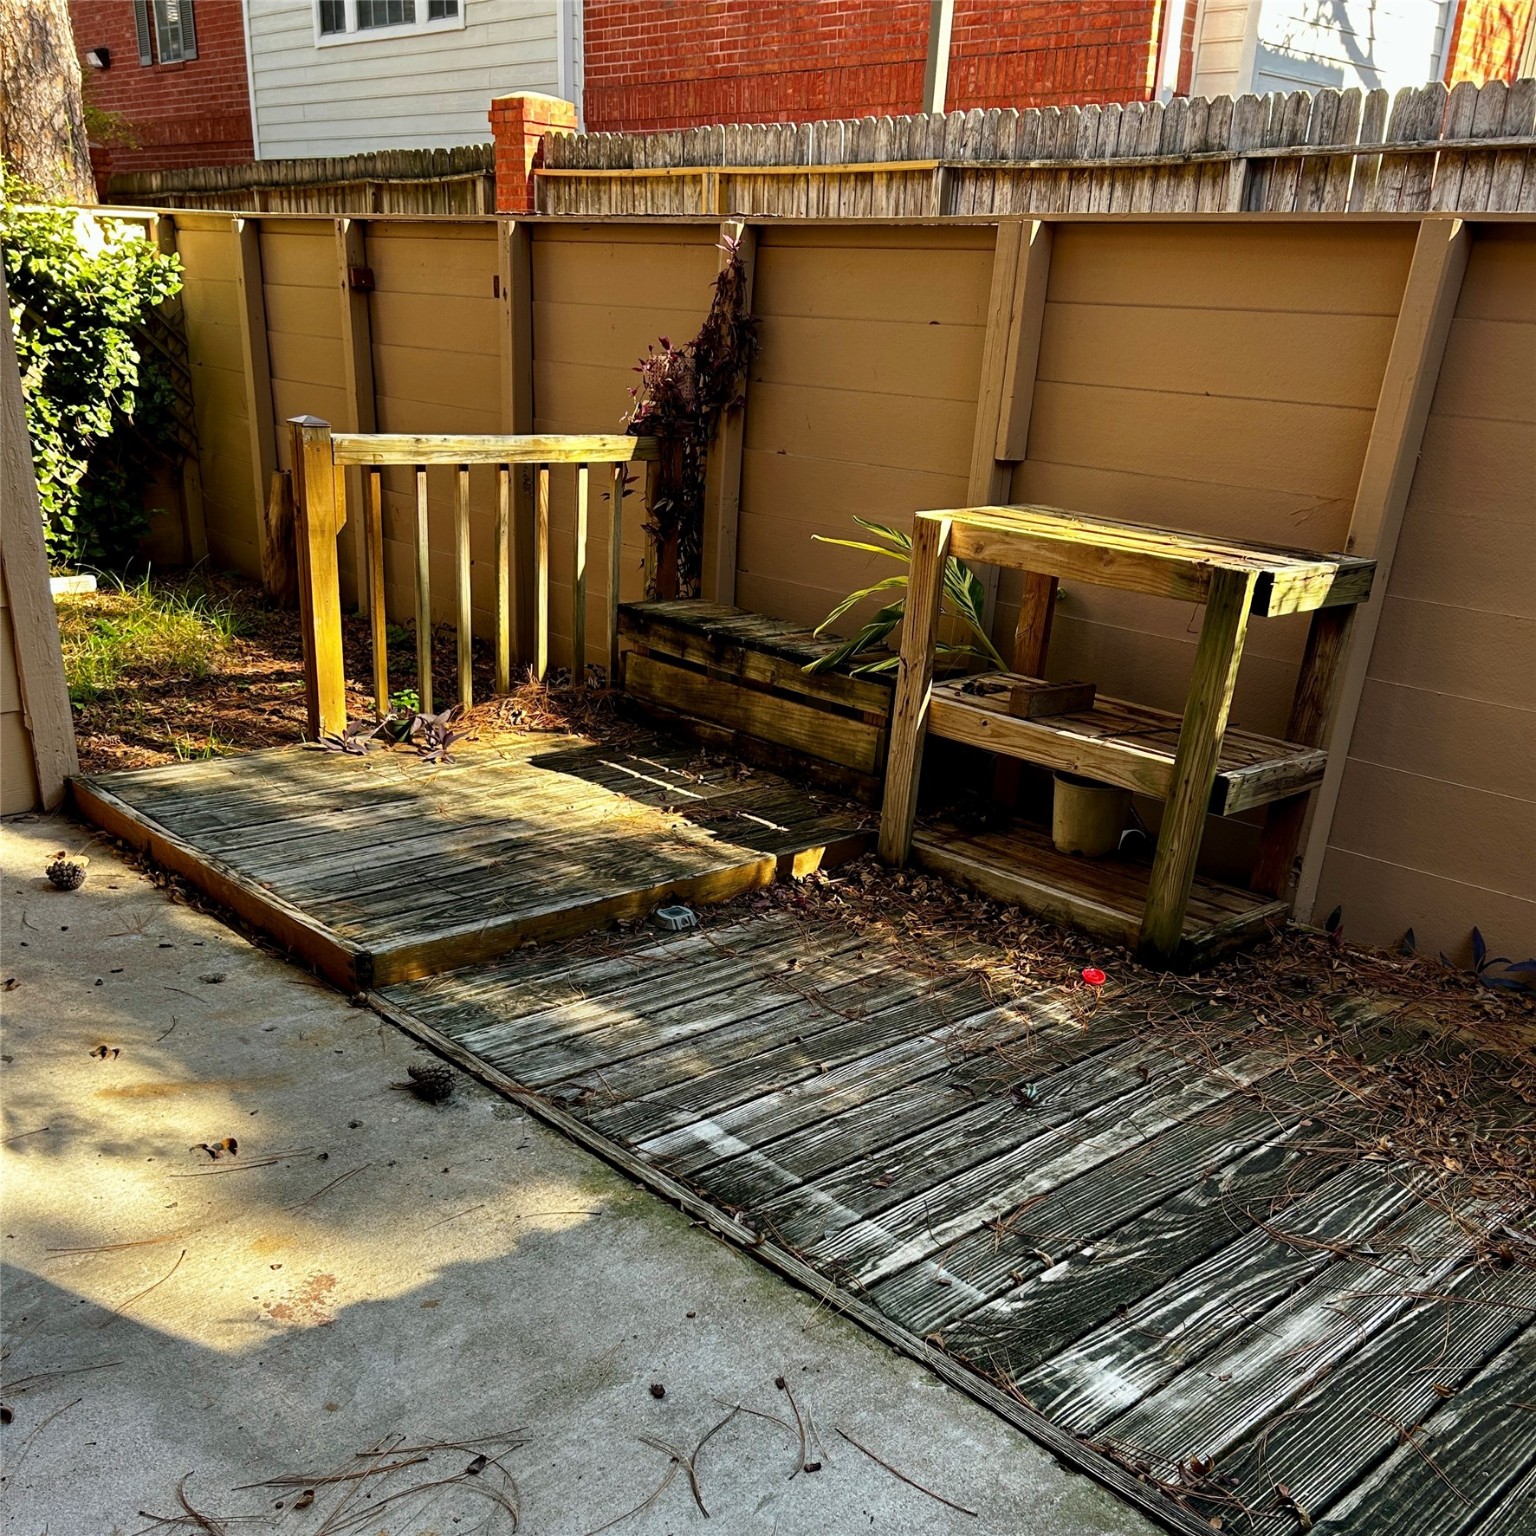 More yard space with lots of room for pets, bbq, table and chairs